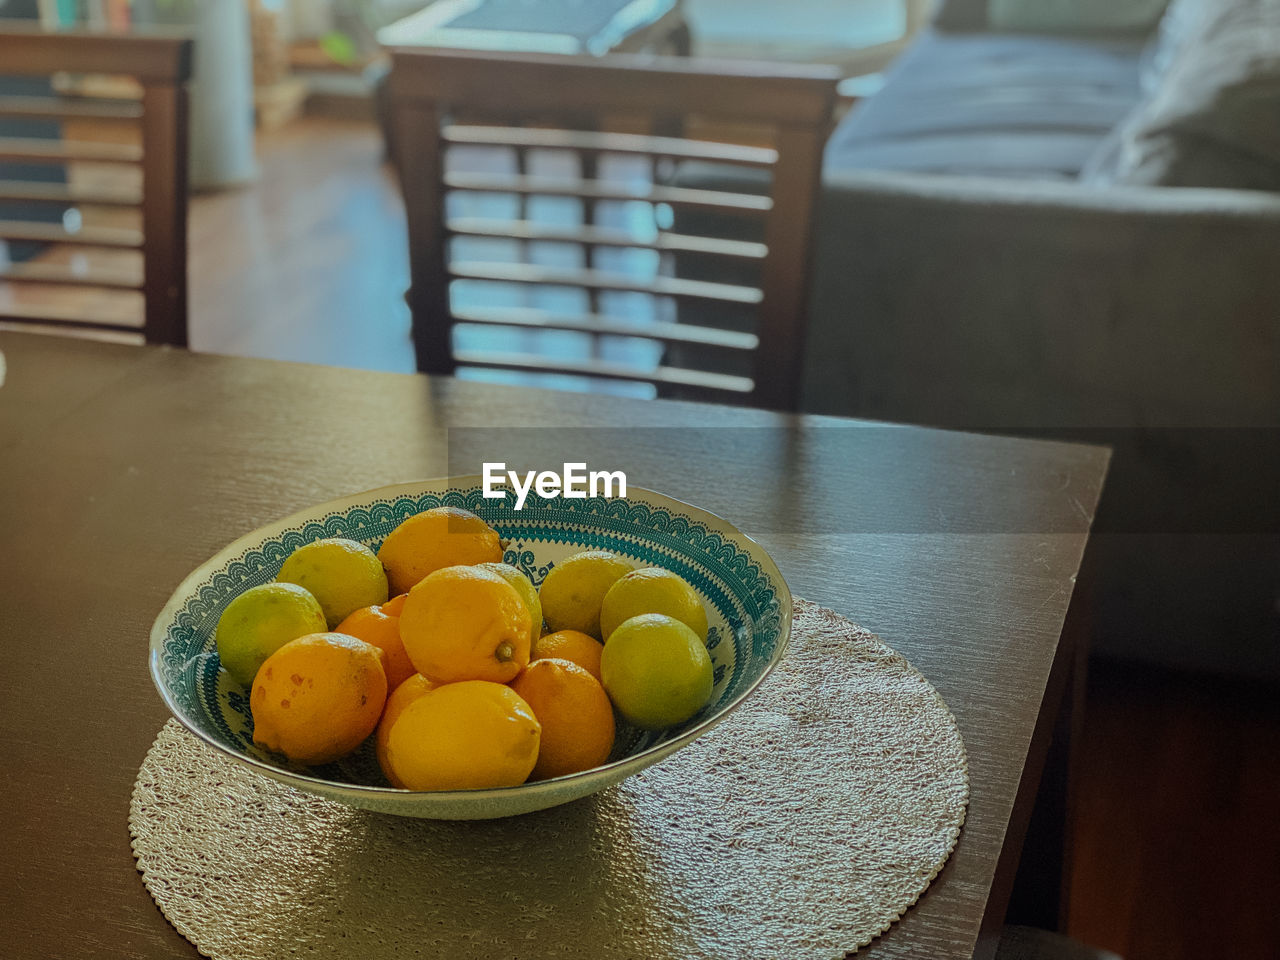 food and drink, food, healthy eating, wellbeing, fruit, citrus, table, freshness, indoors, yellow, citrus fruit, produce, domestic room, no people, furniture, bowl, focus on foreground, home interior, still life, chair, seat, plant, wood, day, high angle view, domestic life, home, clementine, lemon, container